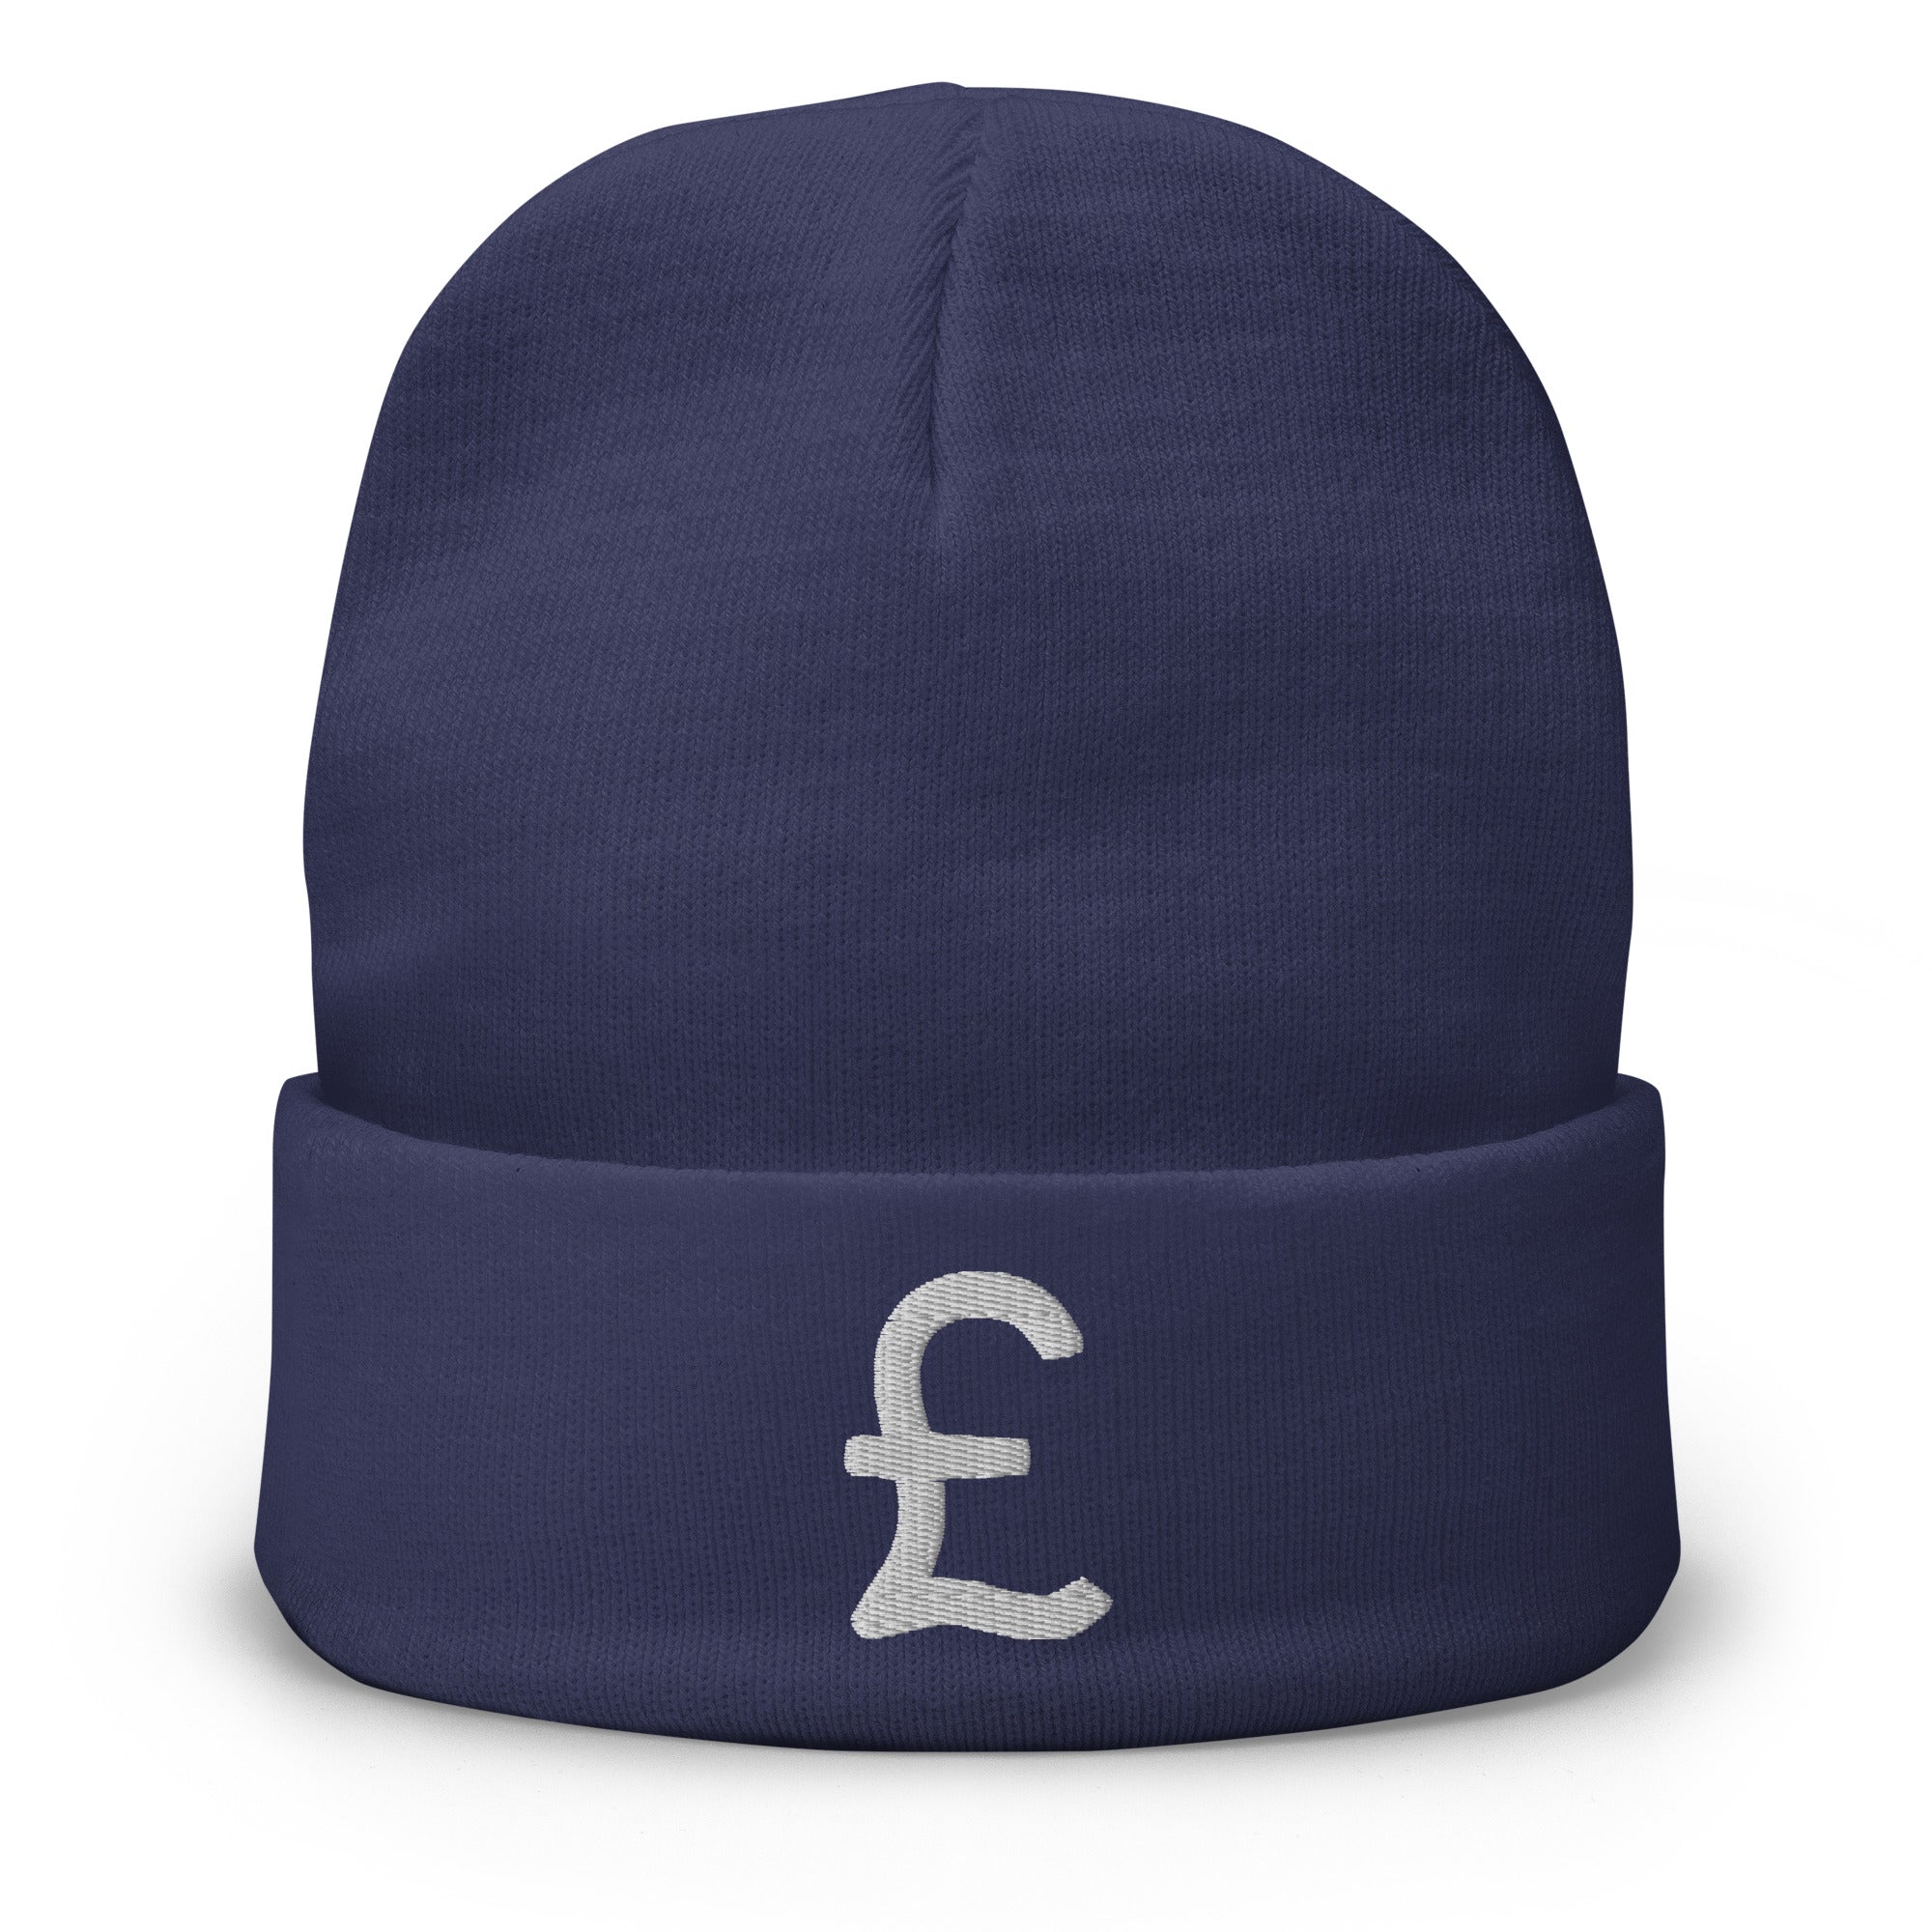 The British Pound Sterling Symbol Money Currency Embroidered Cuff Beanie